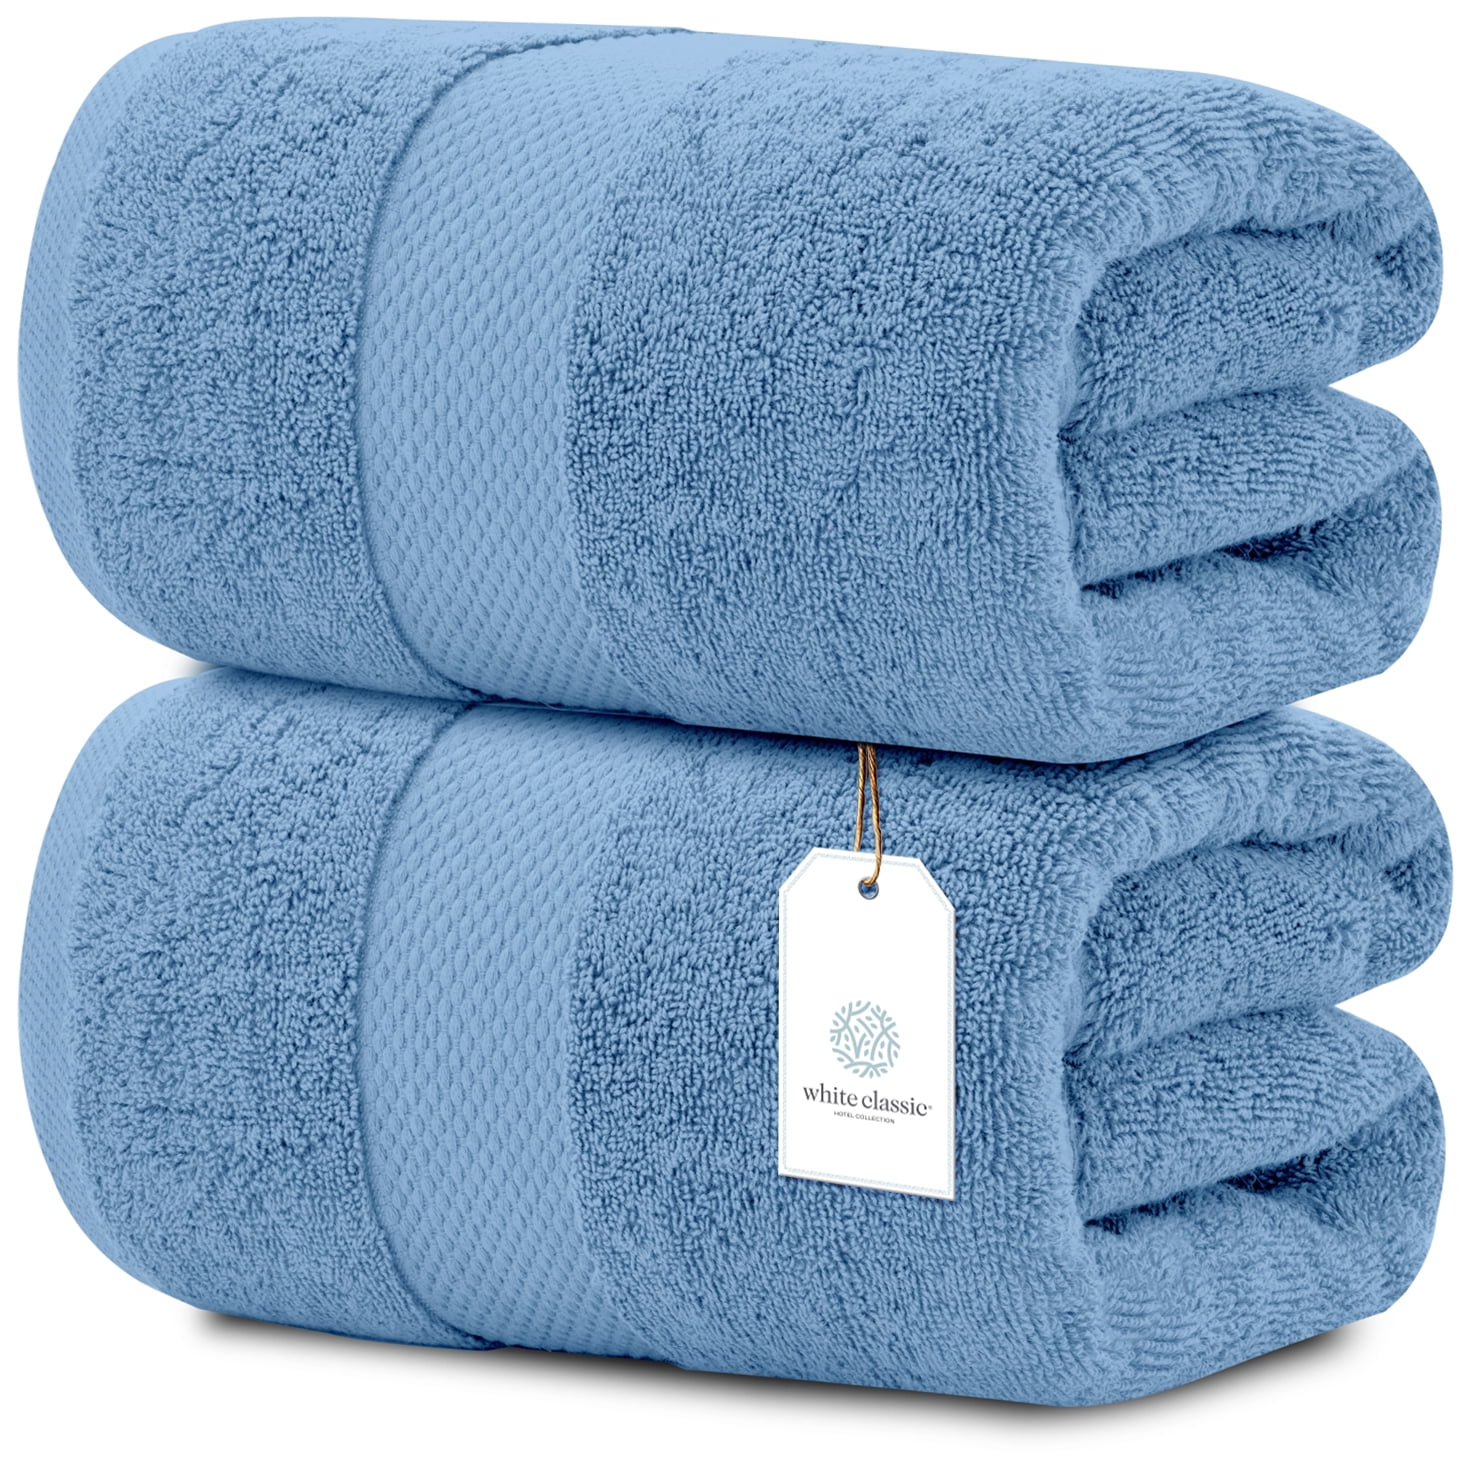 Huck towels - Wi-Supply